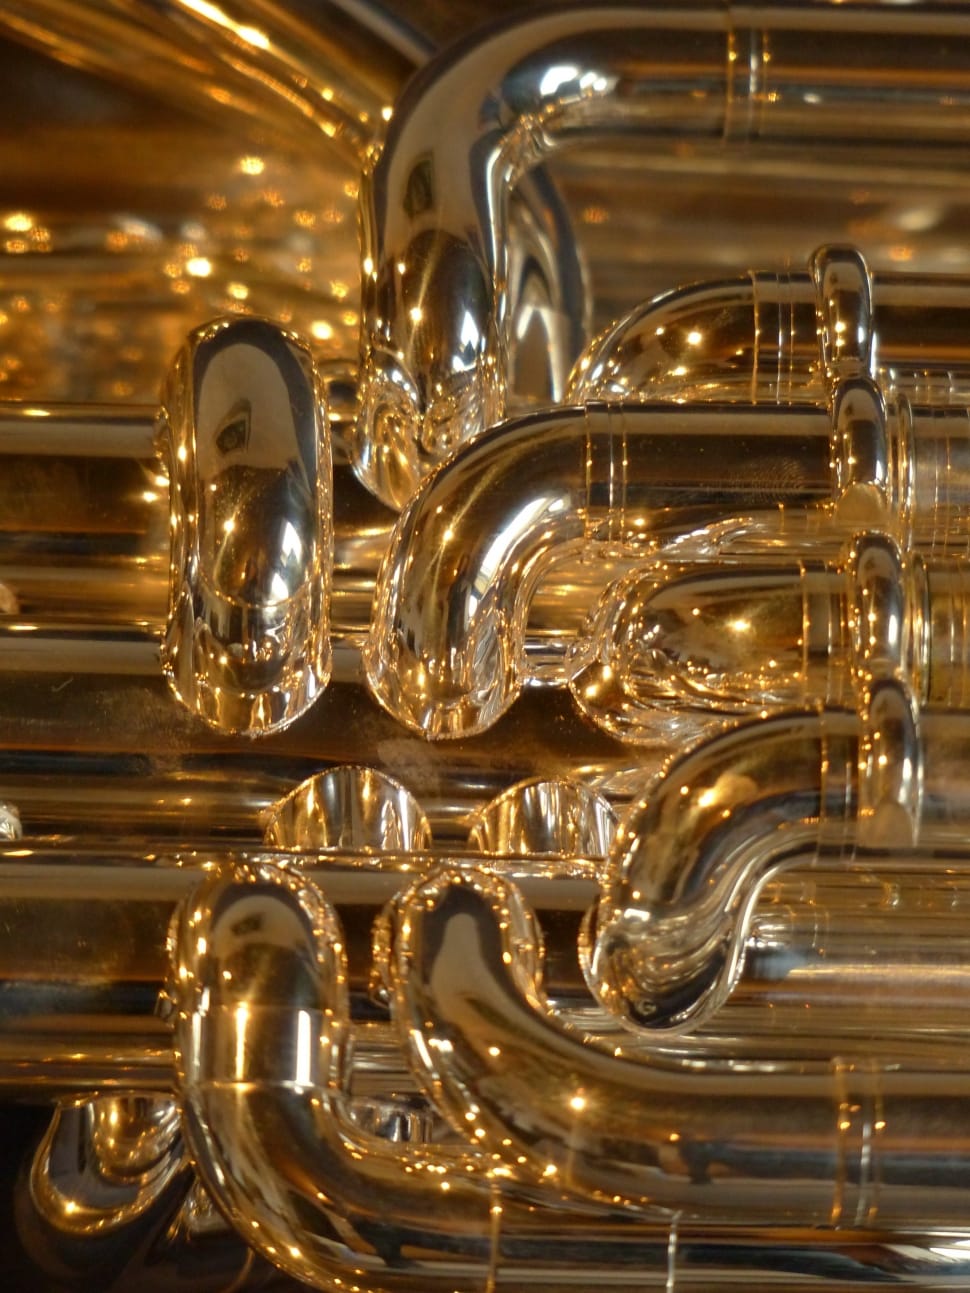 Brass Instrument, Euphonium, Instrument, gold colored, musical instrument preview